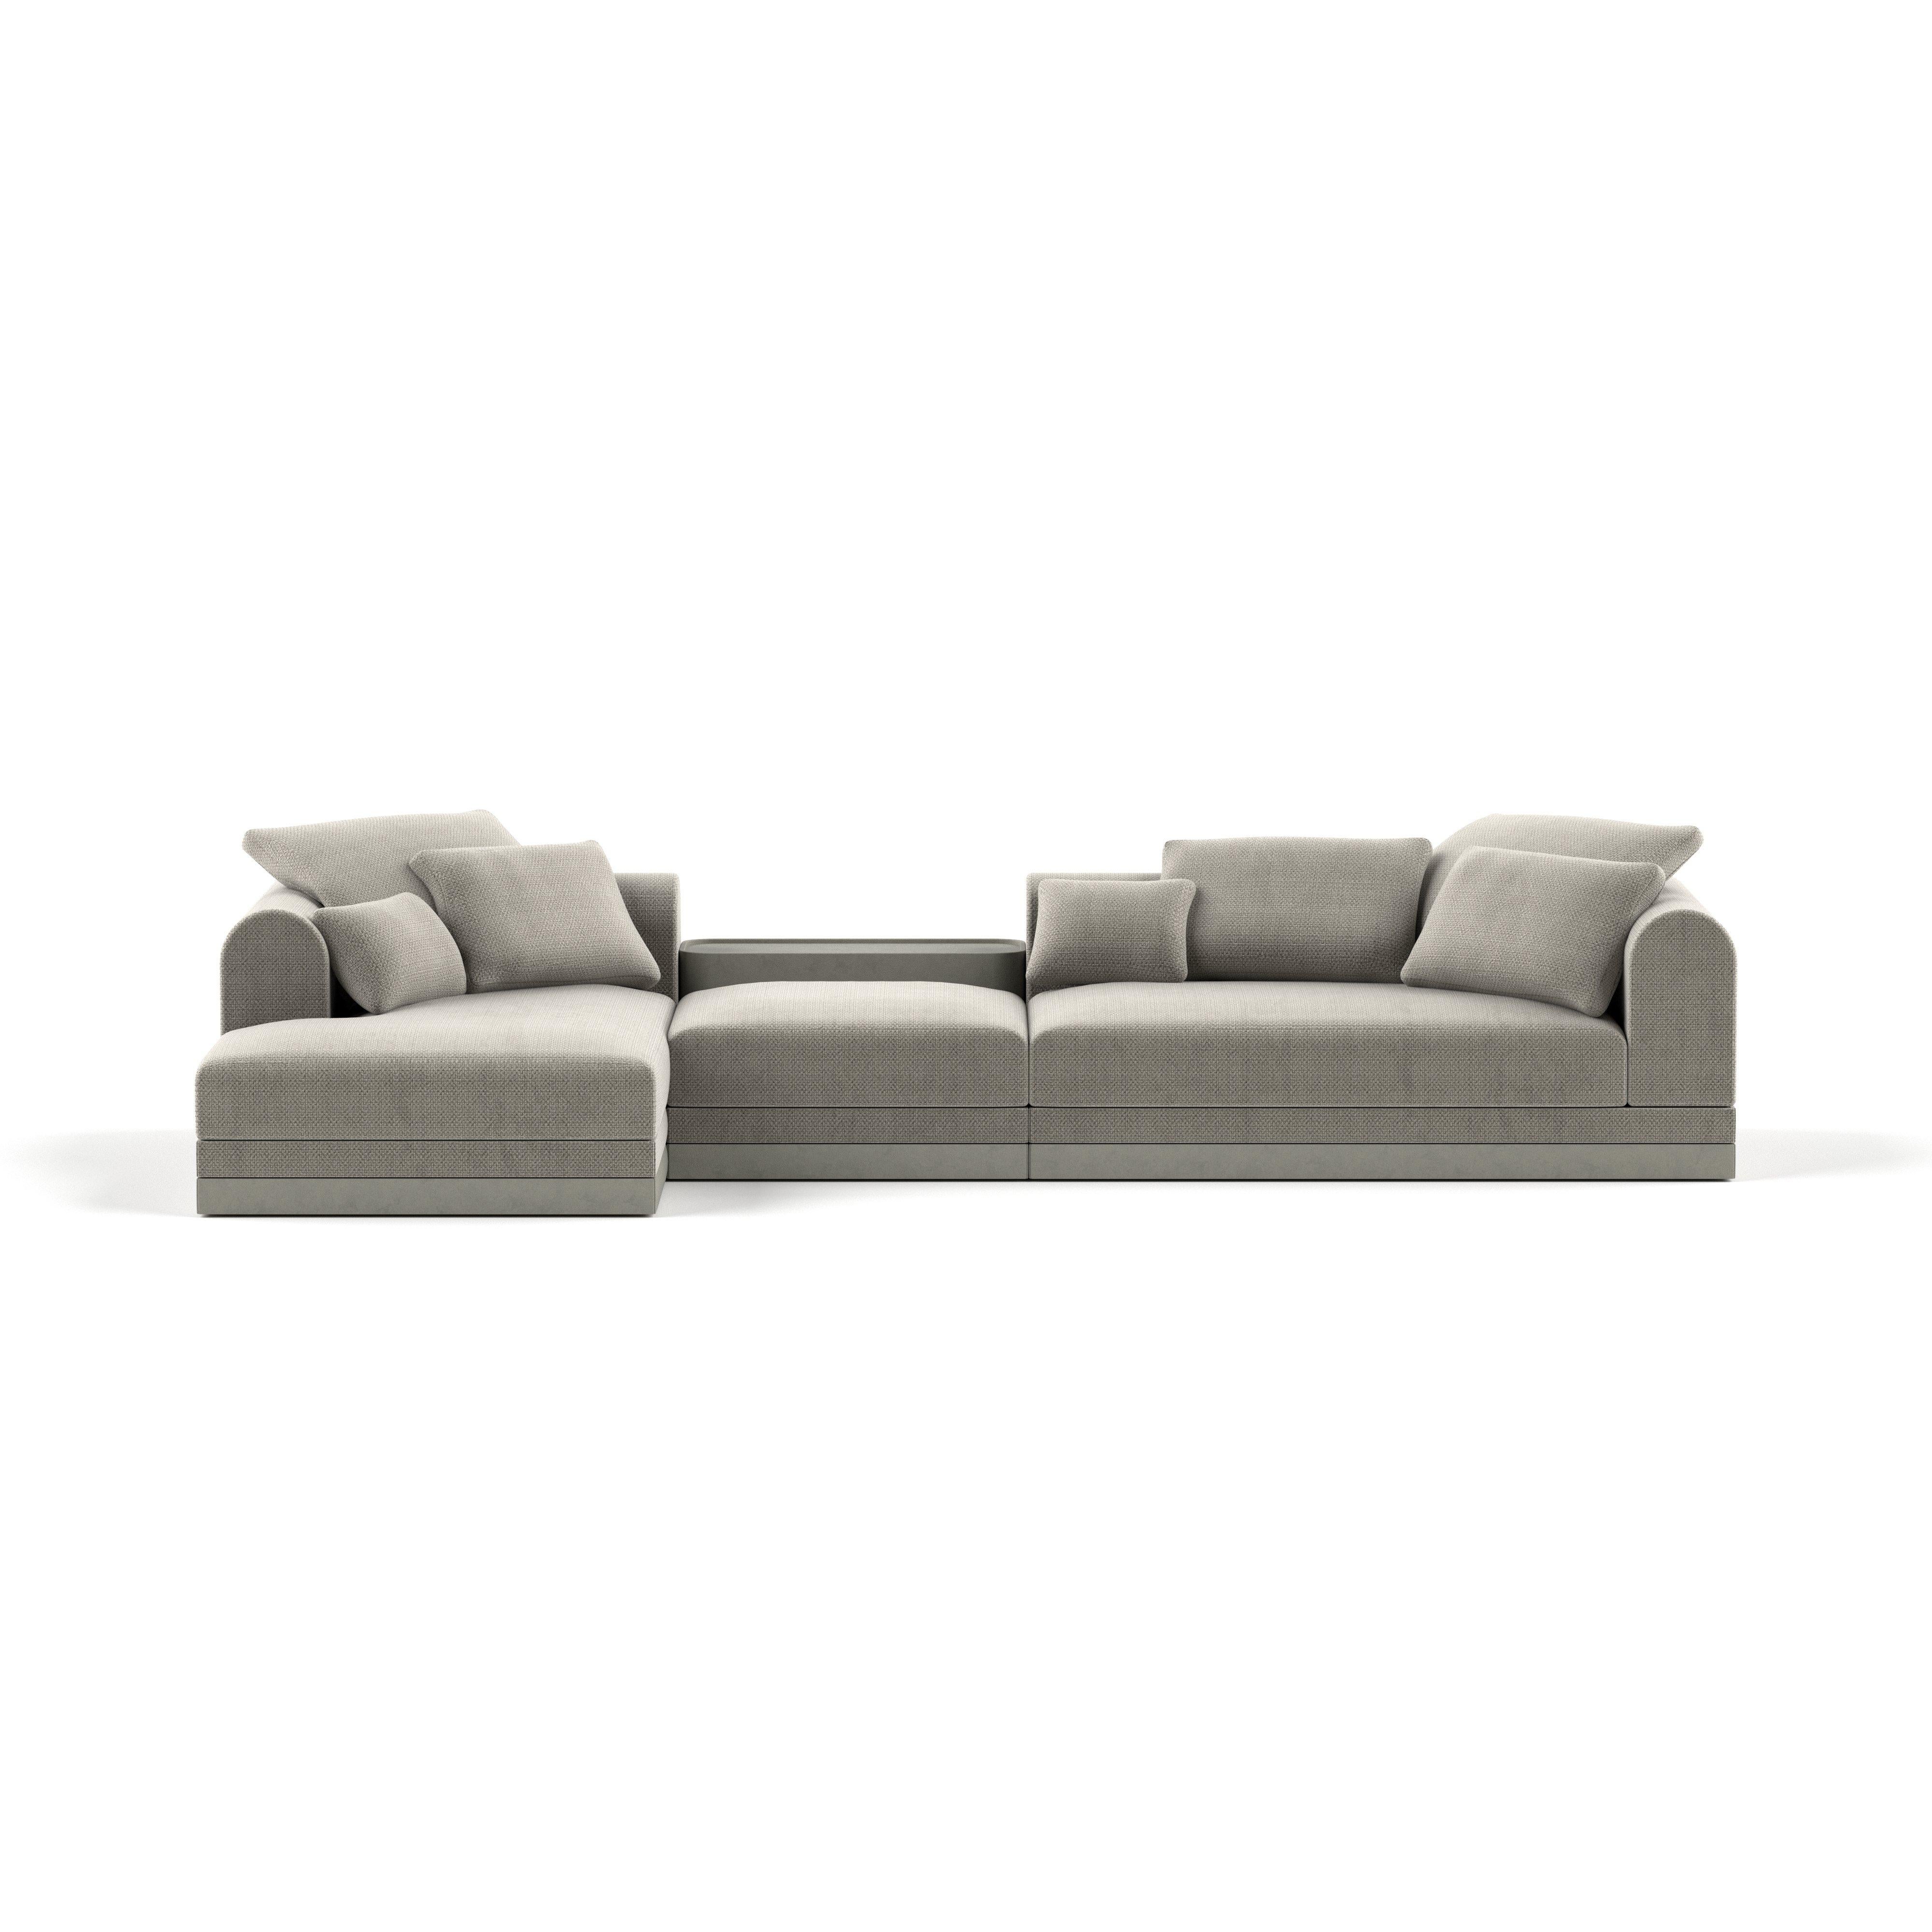 'Aqueduct' Contemporary Sofa by Poiat, Setup 3, Yang 95, Low Plinth For Sale 4